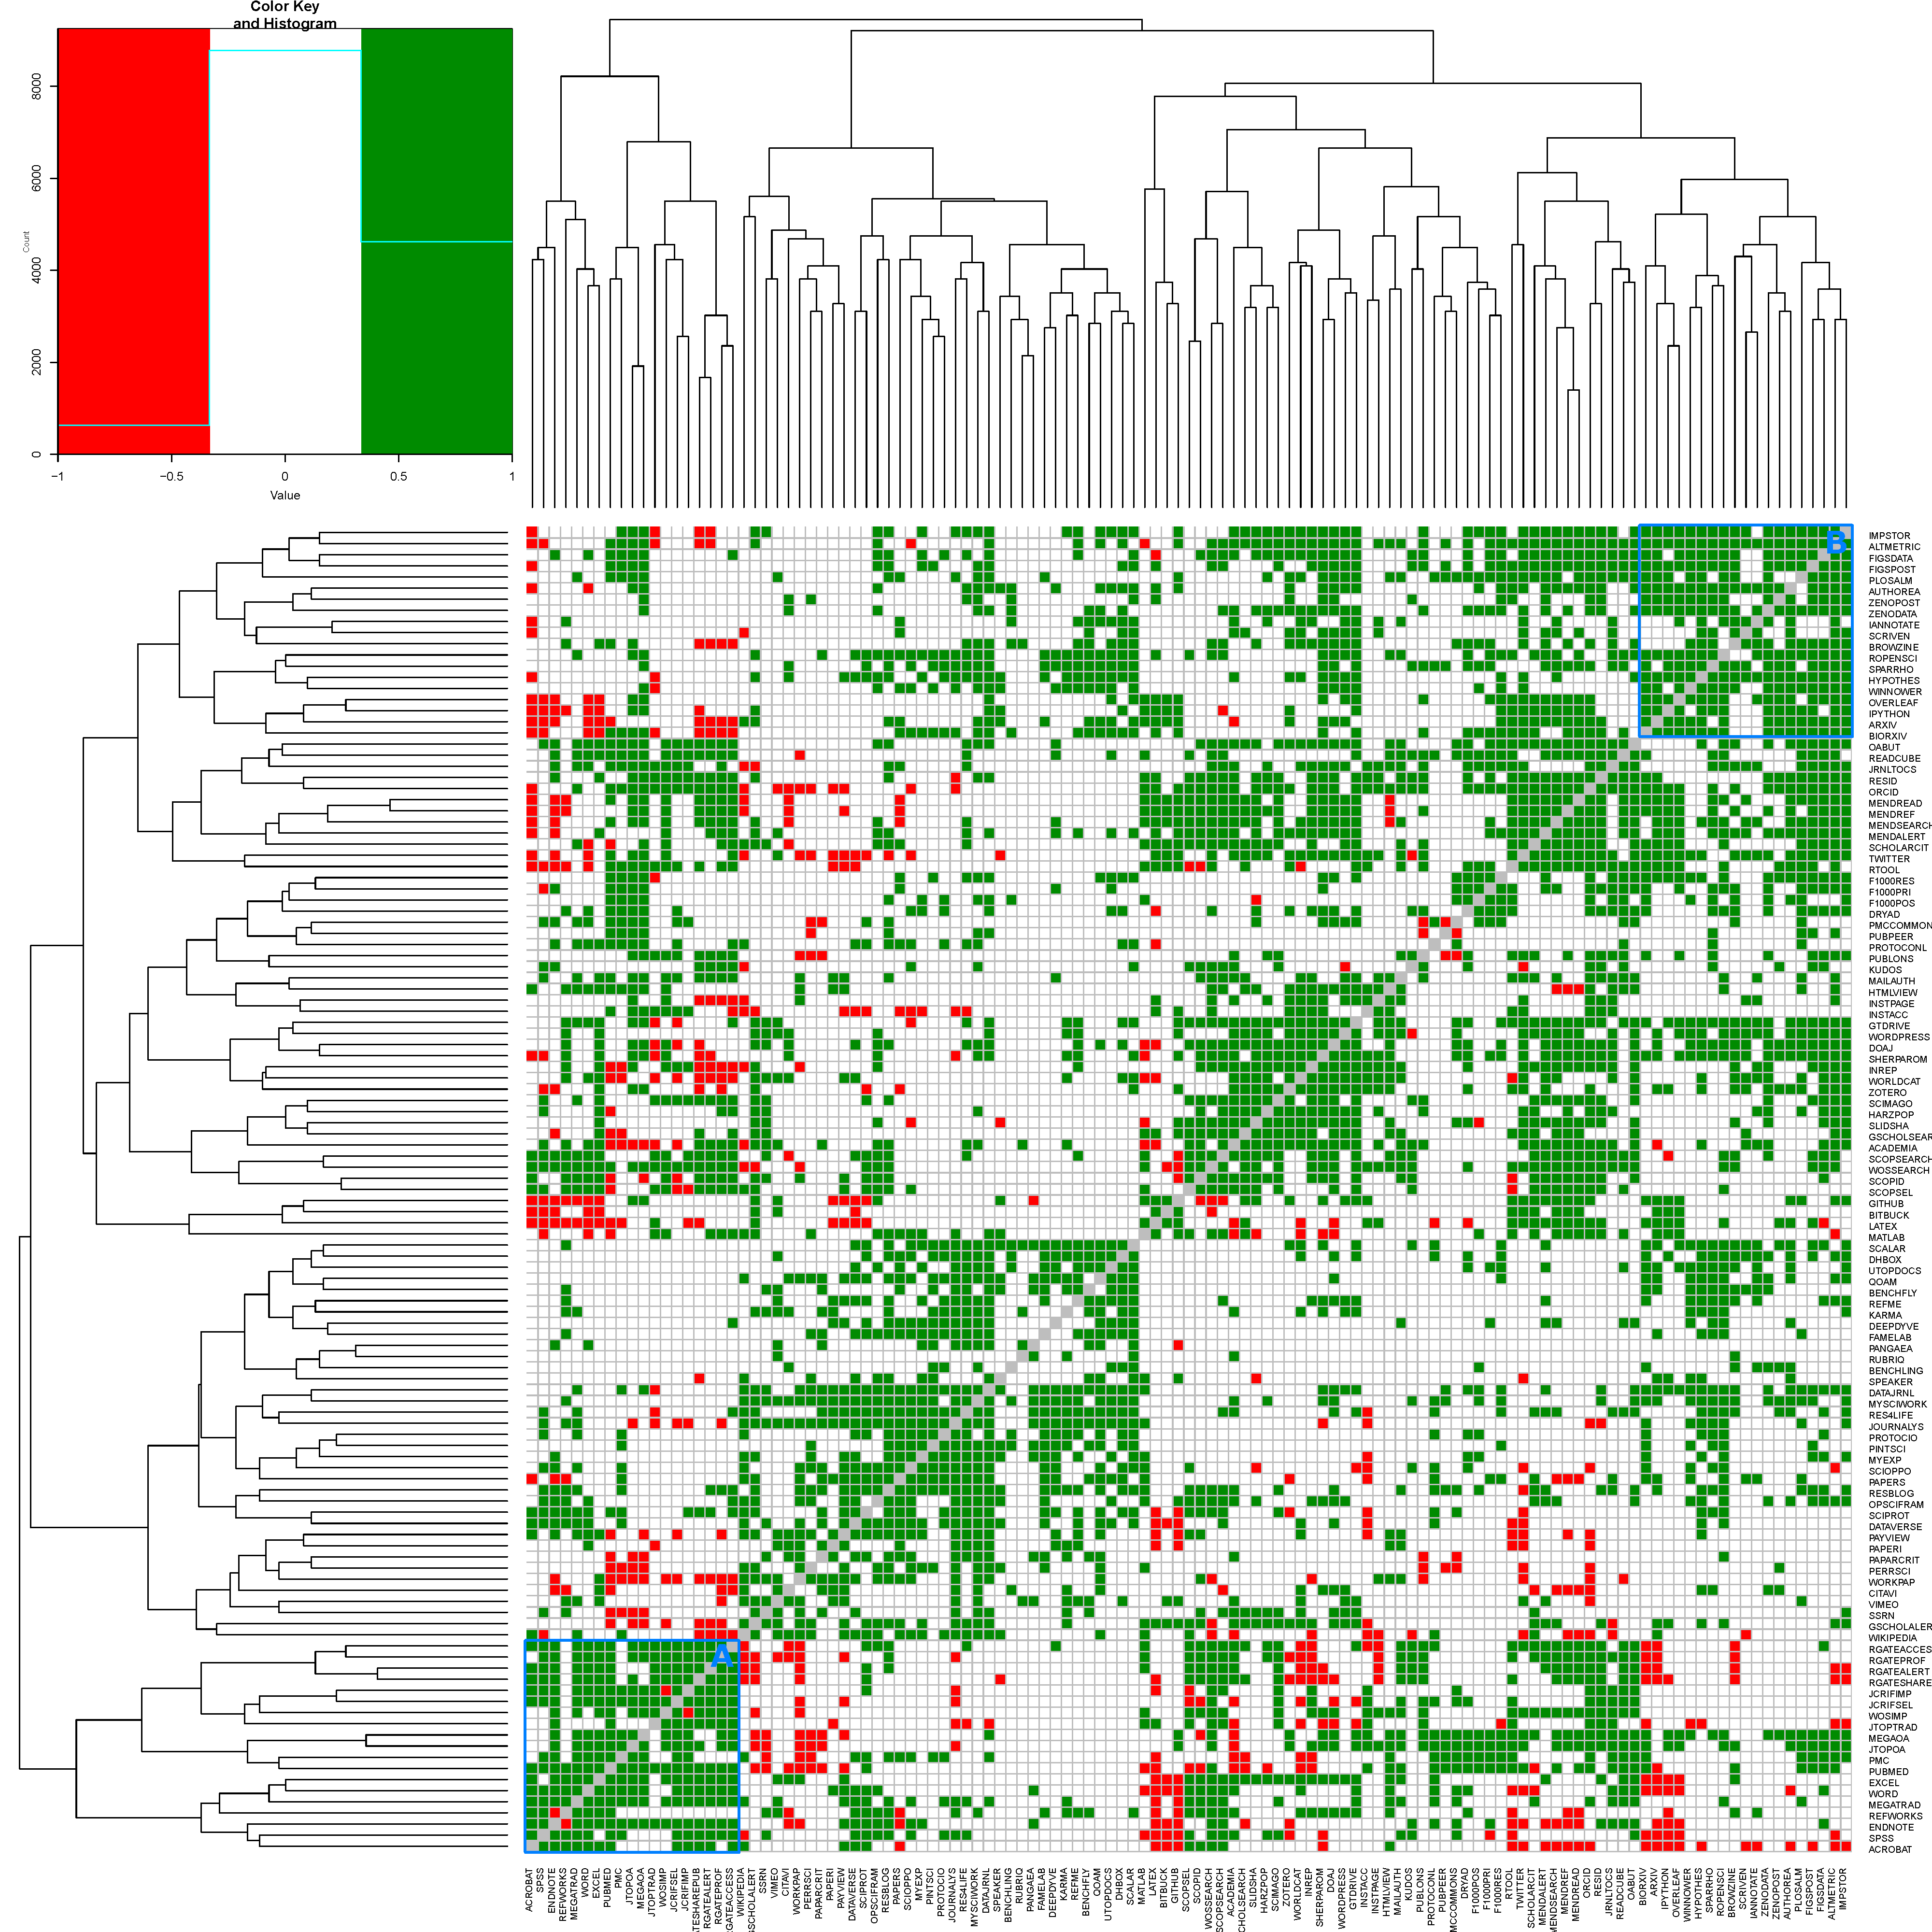 survey_heatmap_p-values_2-tailed_coded_RG_white_AB.png